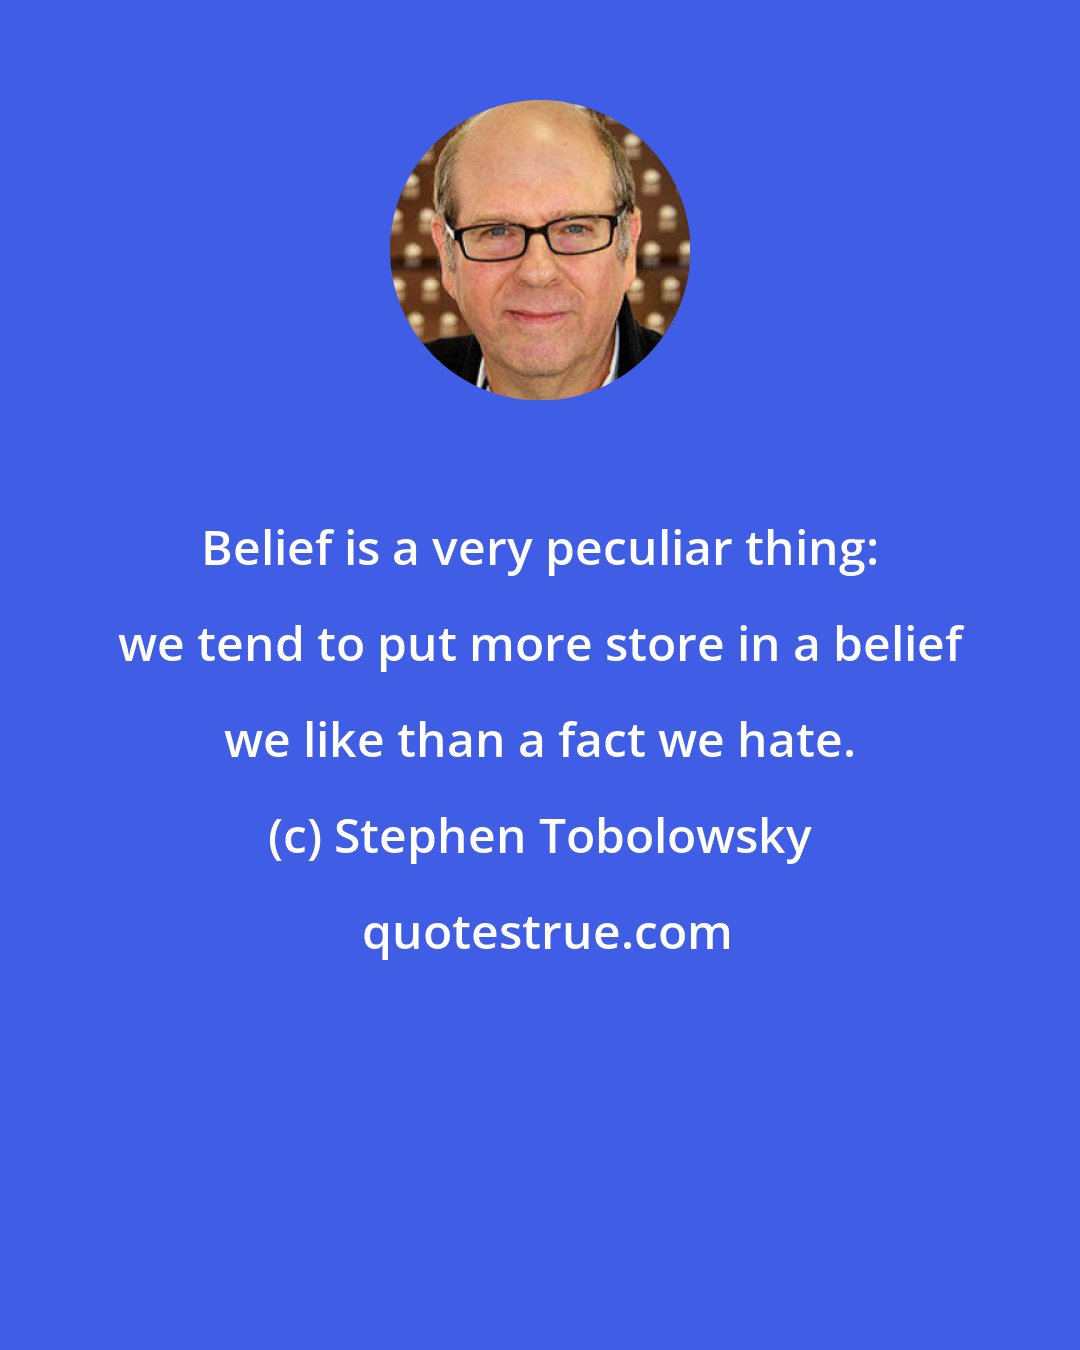 Stephen Tobolowsky: Belief is a very peculiar thing: we tend to put more store in a belief we like than a fact we hate.